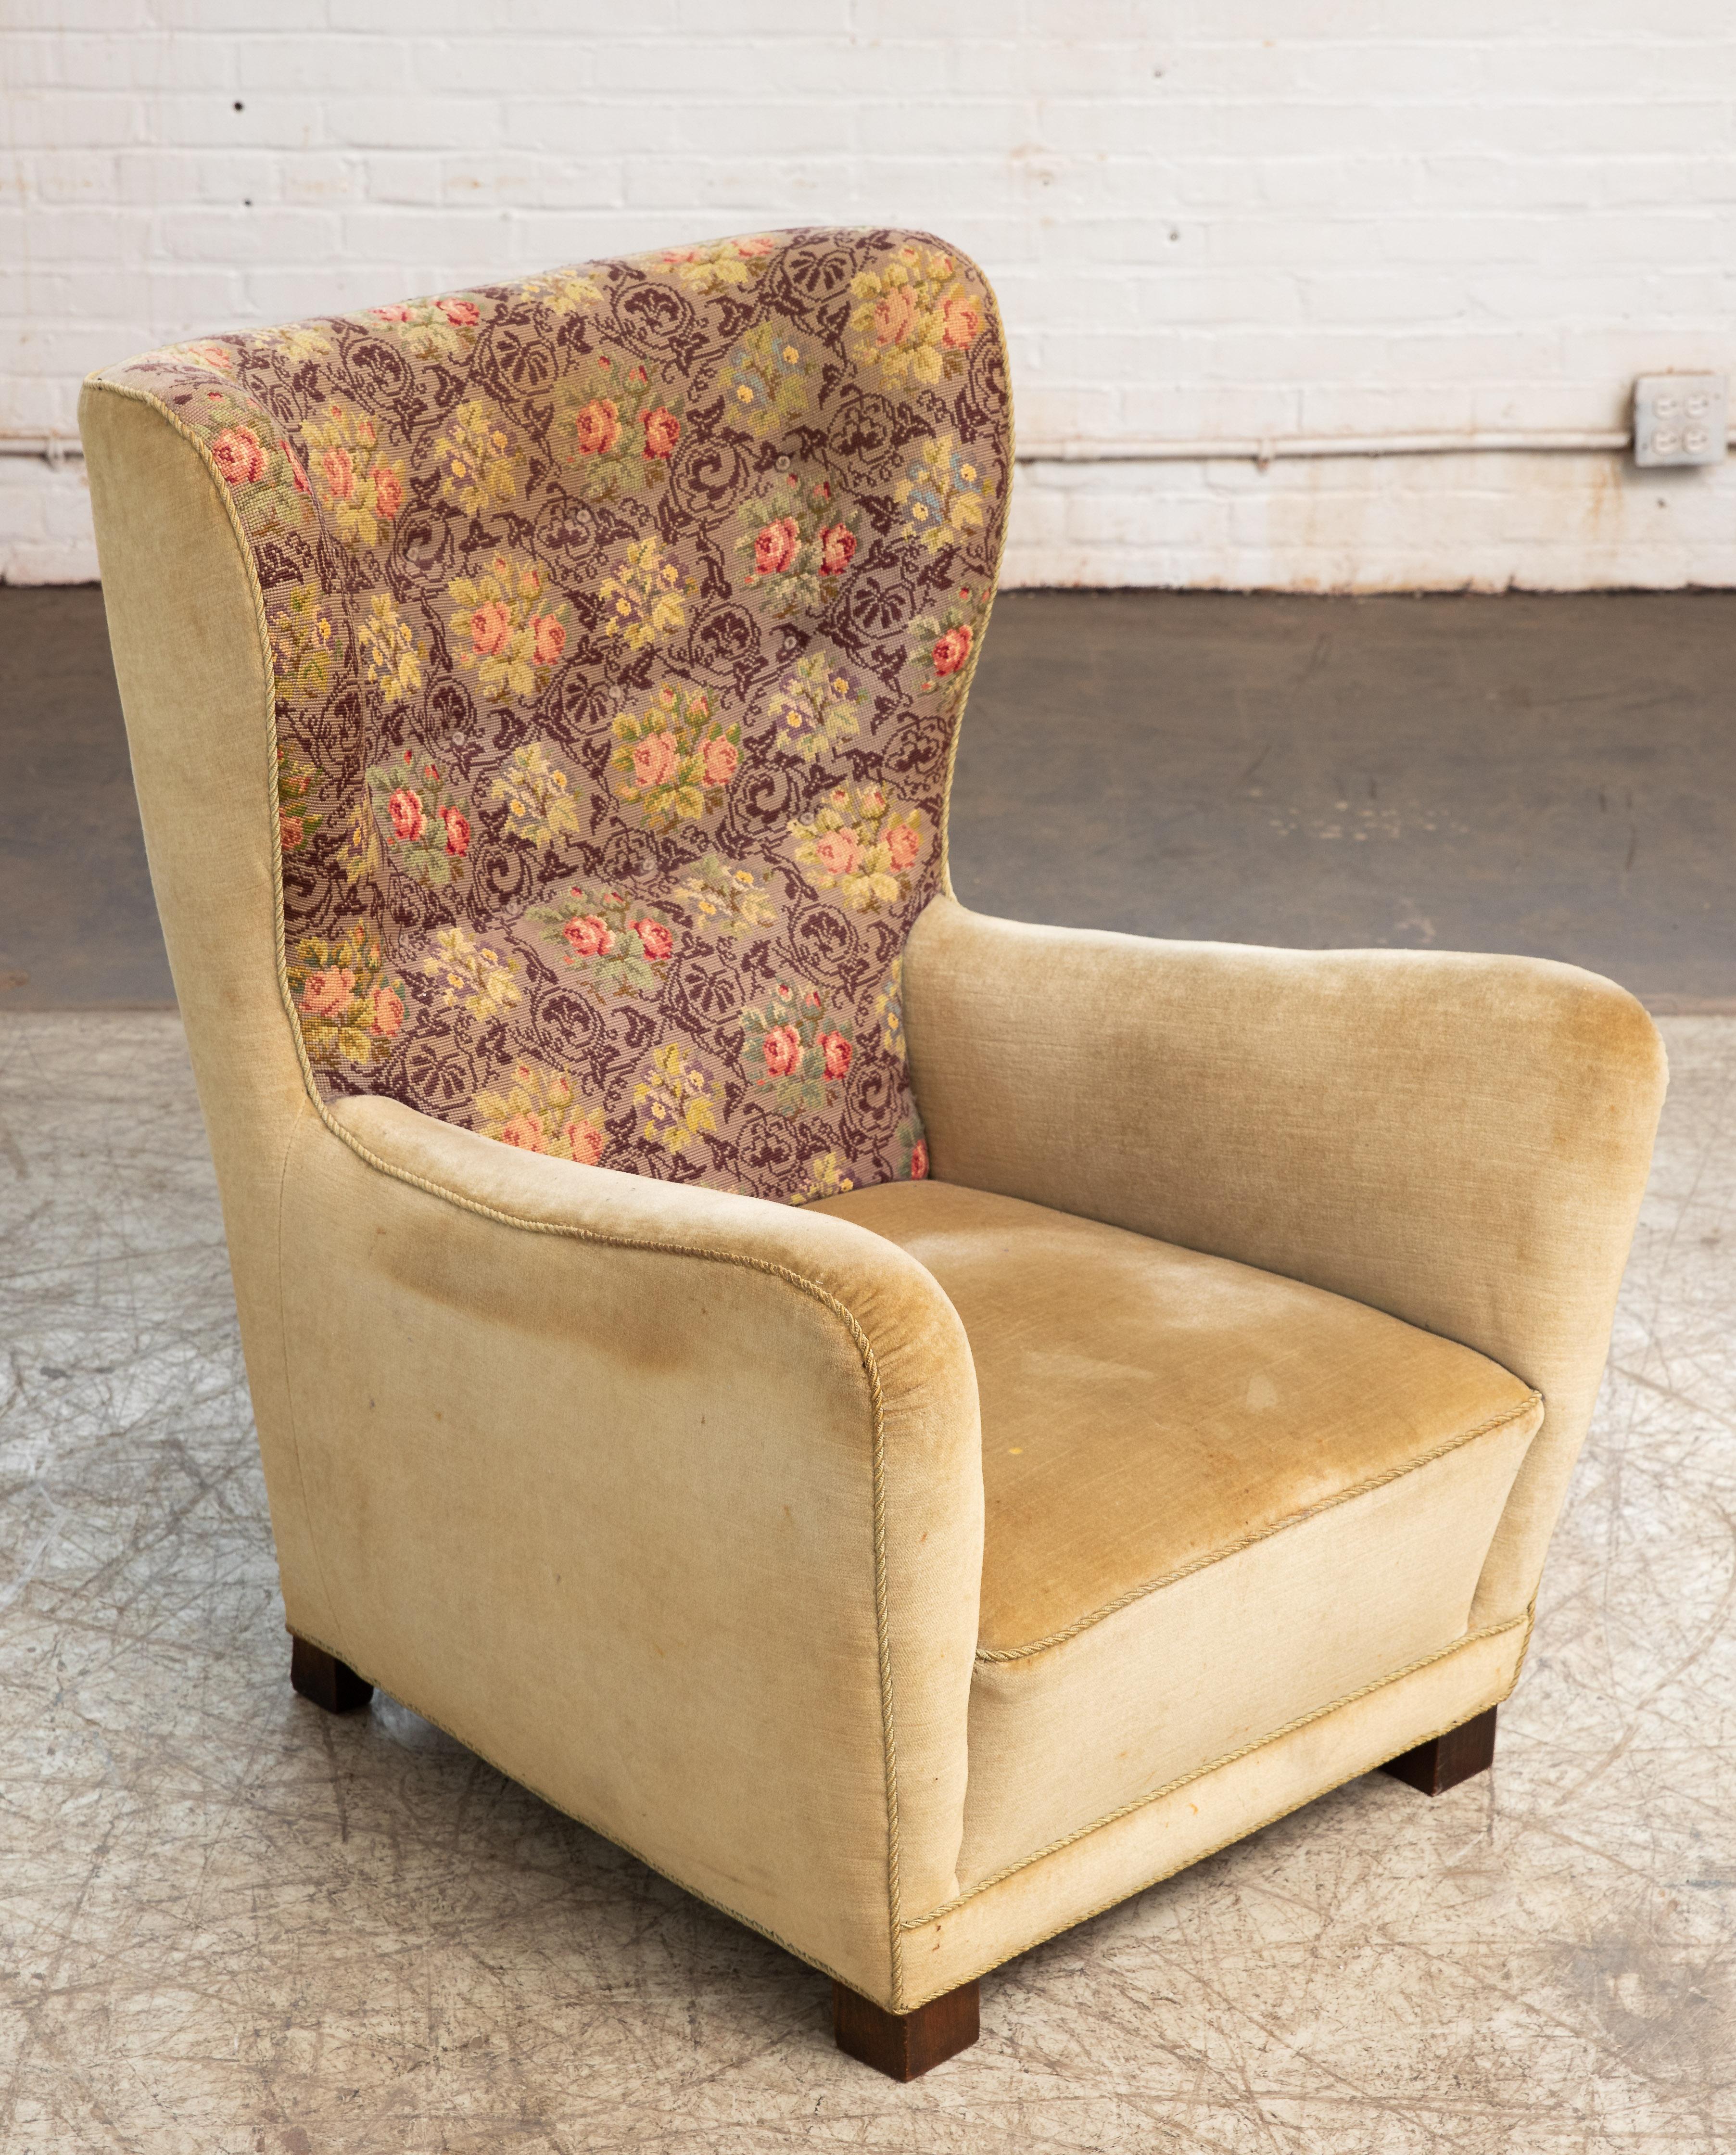 Sought after Fritz Hansen Model 1672 high back lounge chair made circa 1942. The chairs was first seen on page 12 in Fritz Hansen's 1942 catalog. The model 1672 has become of the most sought after and iconic high back chairs to come out of the